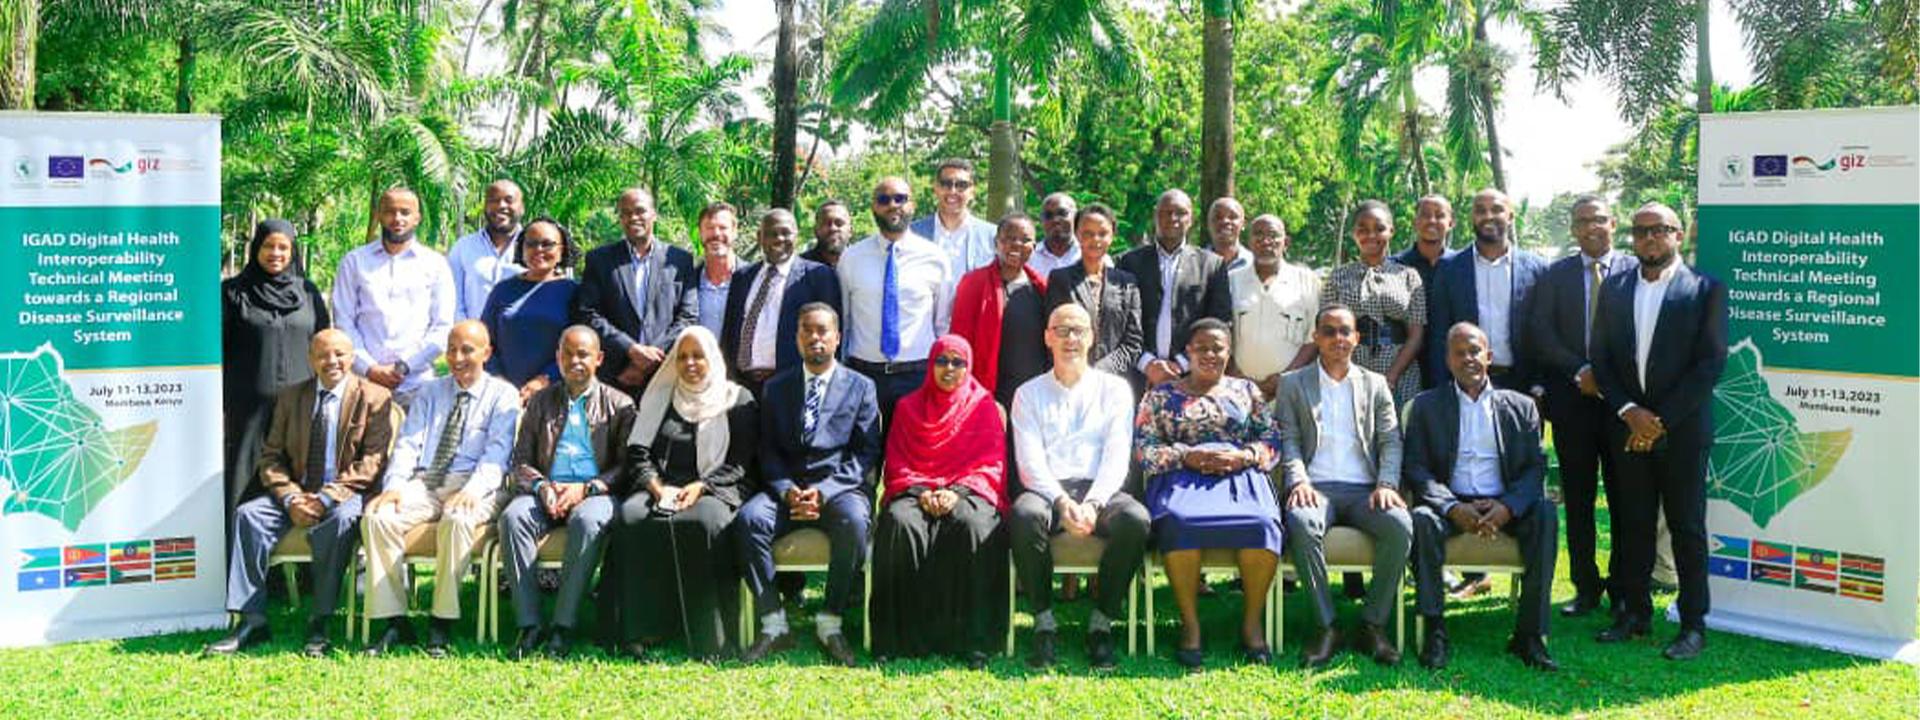 IGAD Health Technical Experts Collaborate to Support Interoperability Standards Towards a Regional Disease Surveillance System for Effective Regional Responses